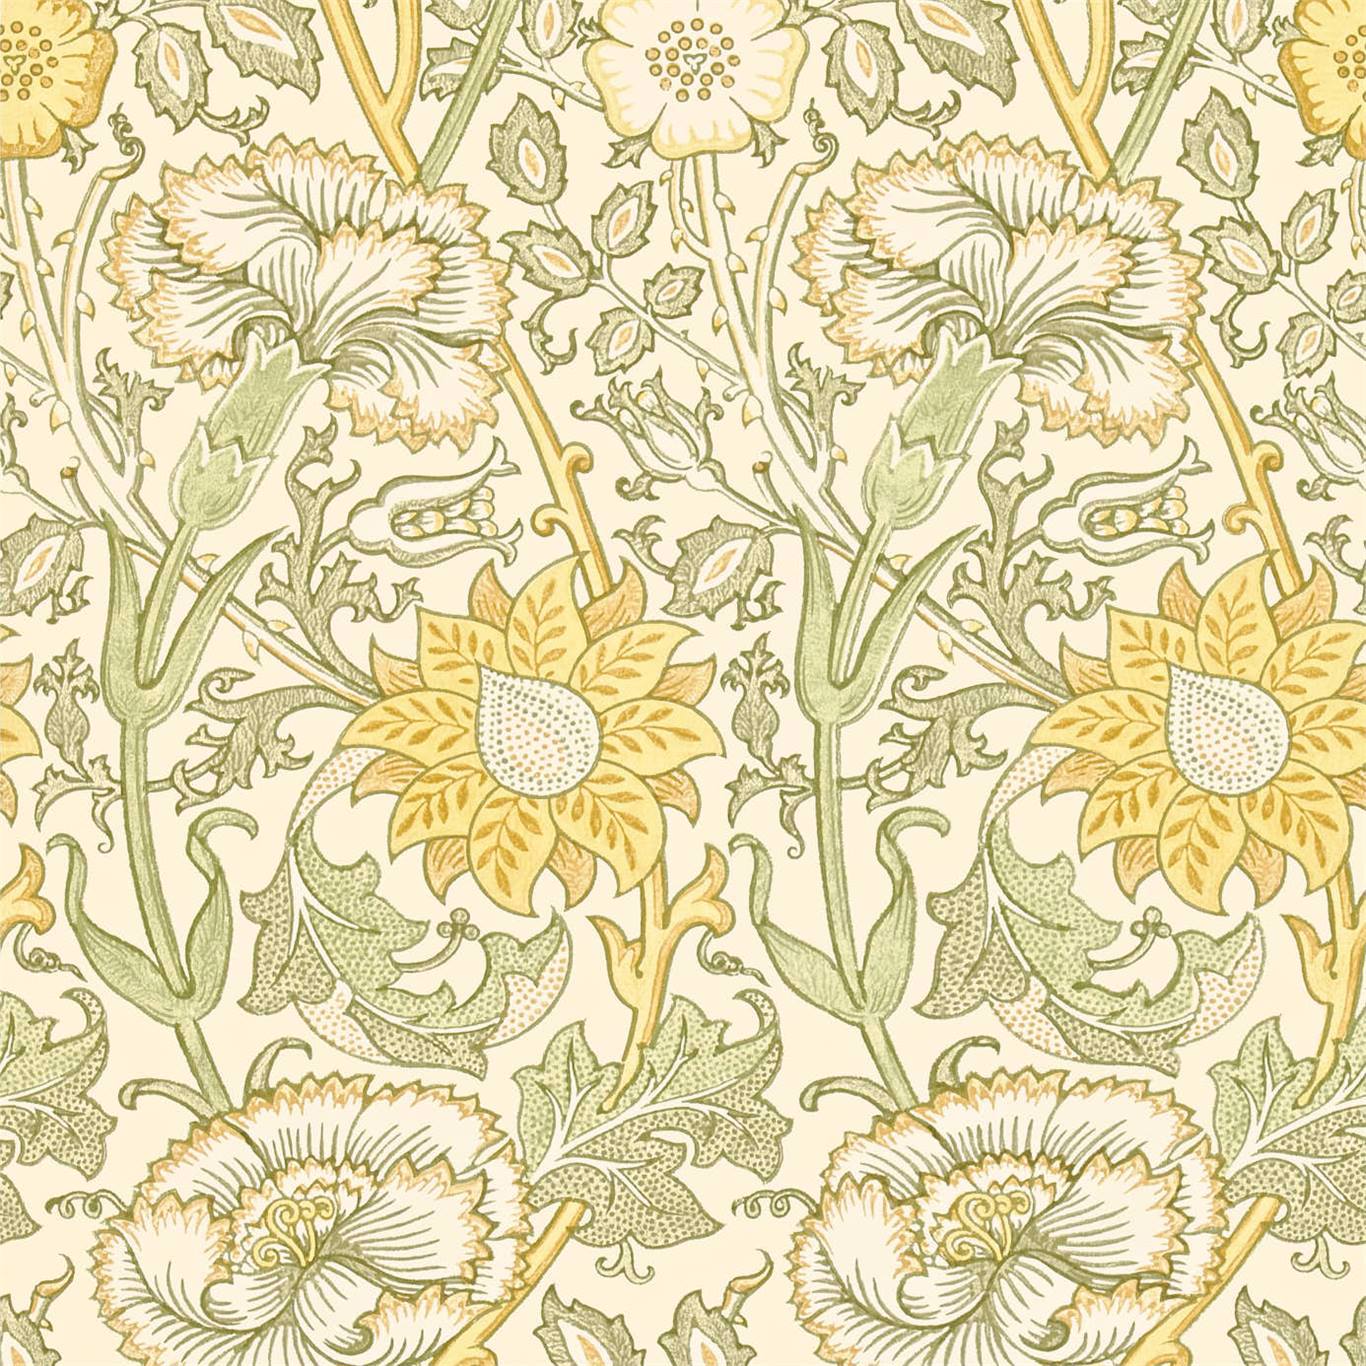 Pink & Rose Cowslip/Fennel Wallpaper DCMW216836 by Morris & Co